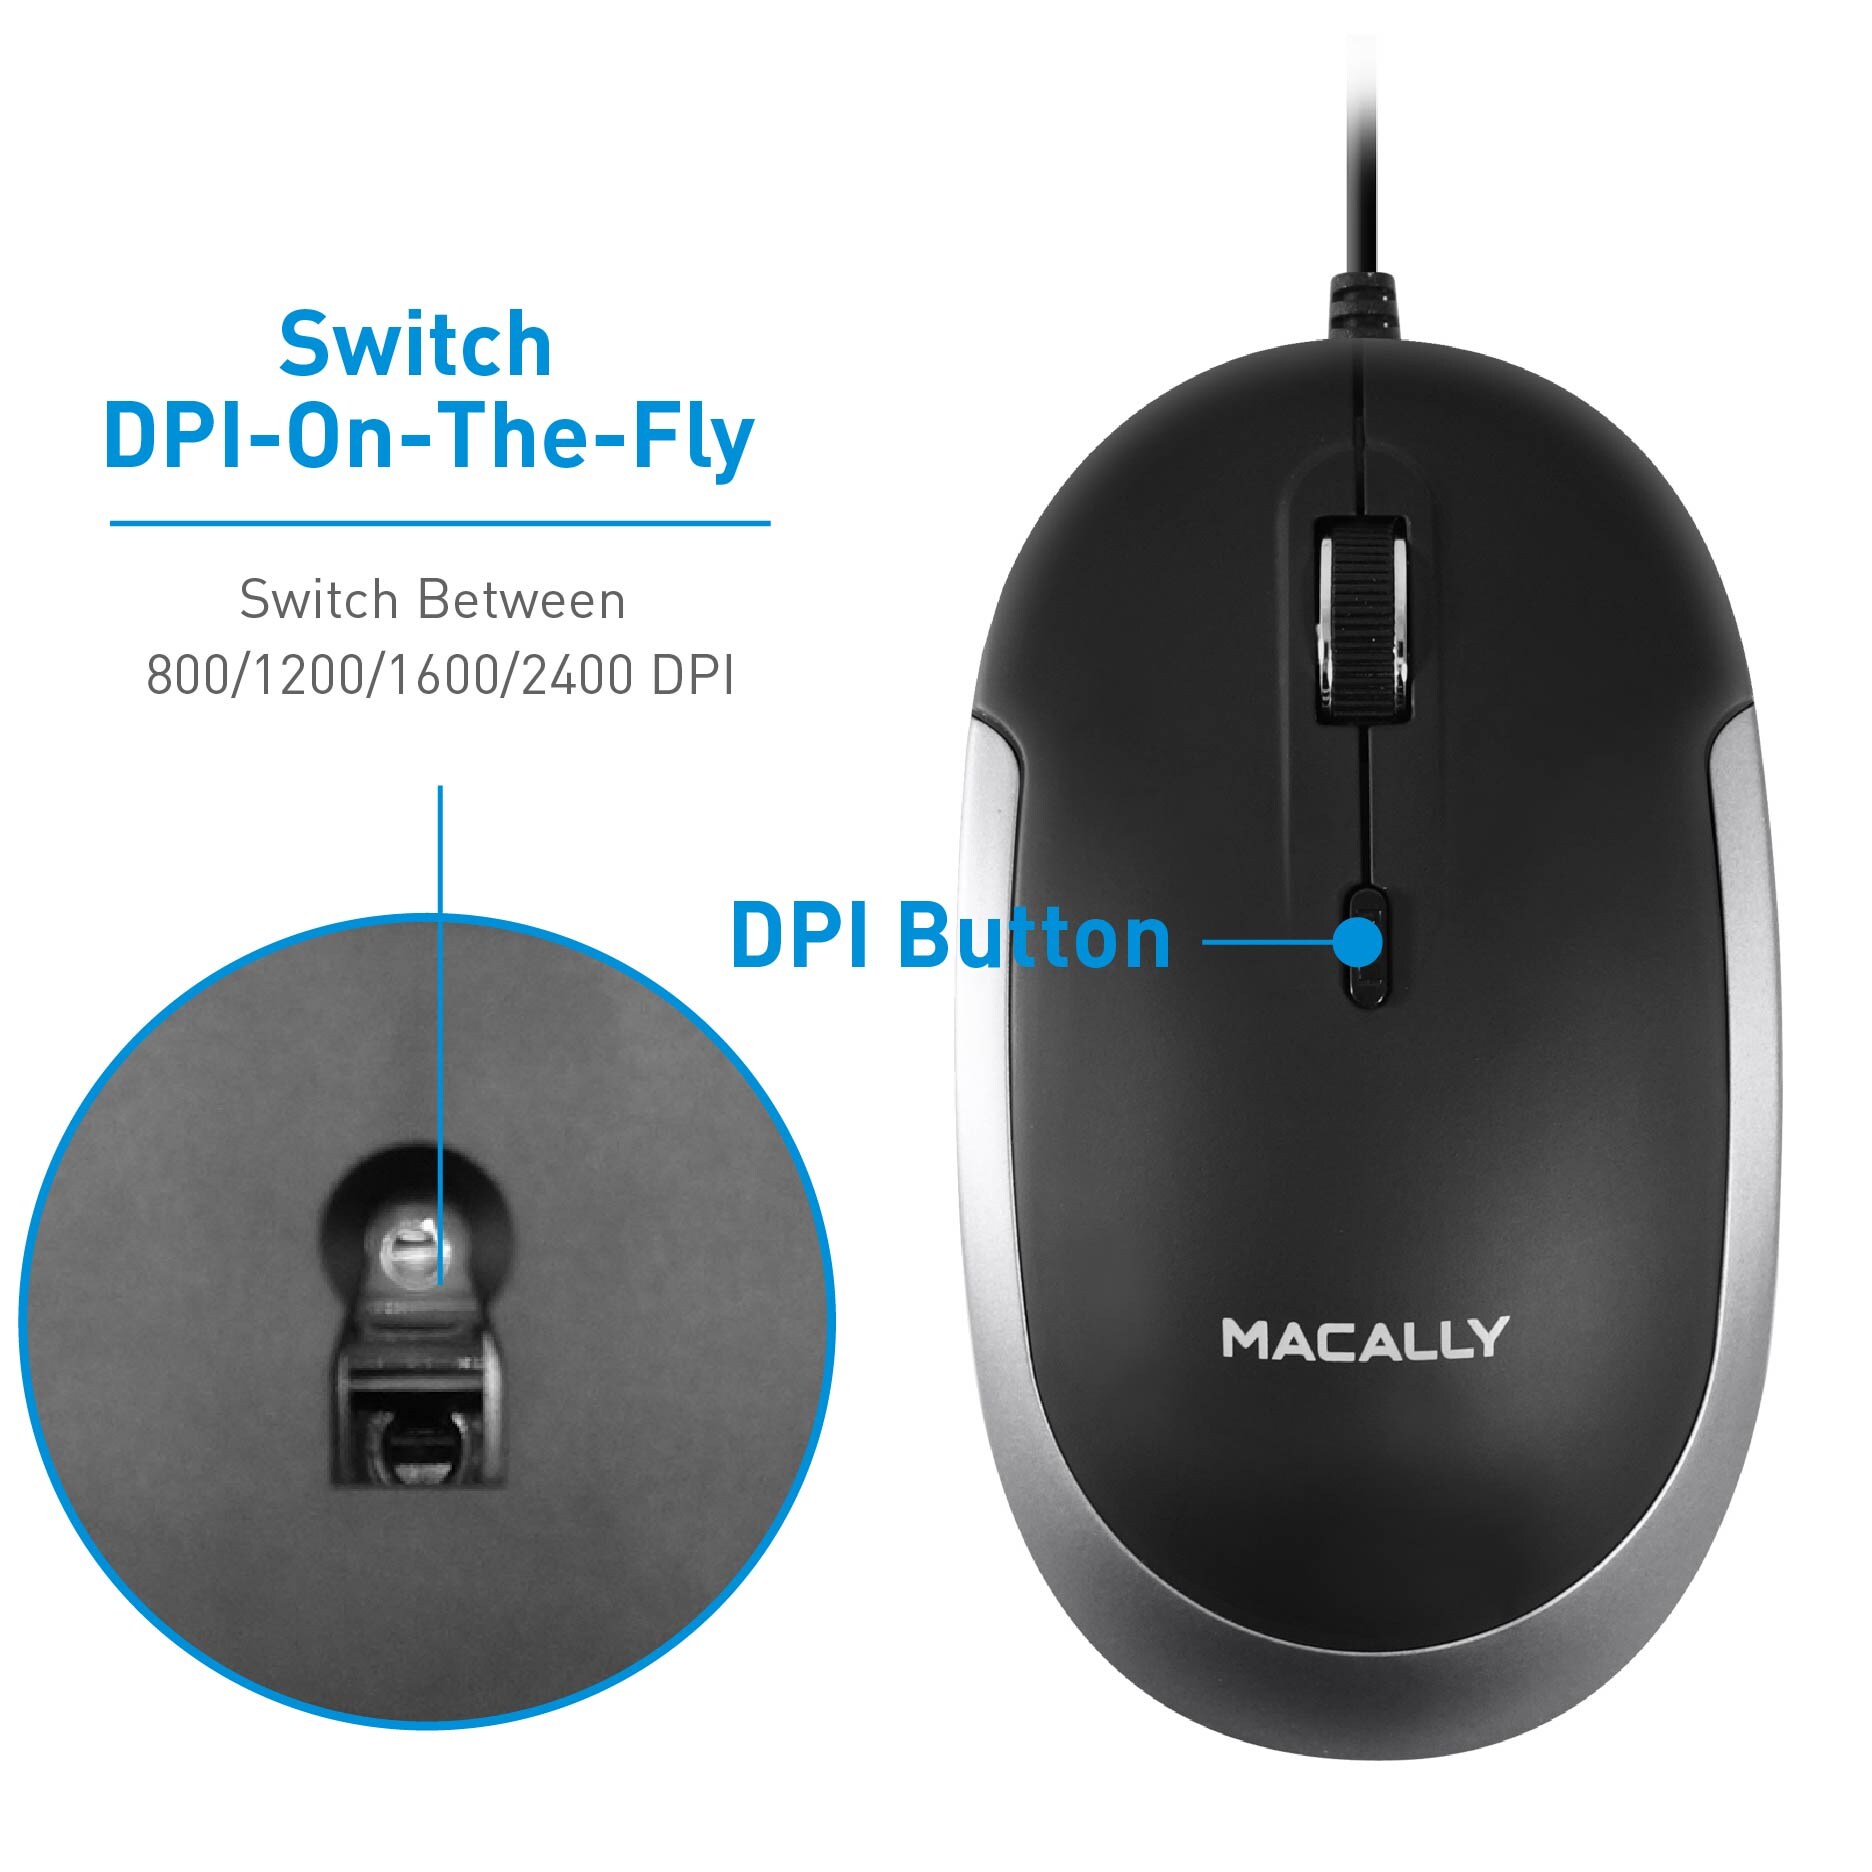 Macally Macally Silent USB Mouse Wired for Apple Mac or Windows PC  Laptop/Desktop Computer | Slim and Compact Mice Design with Optical Sensor  and DPI 